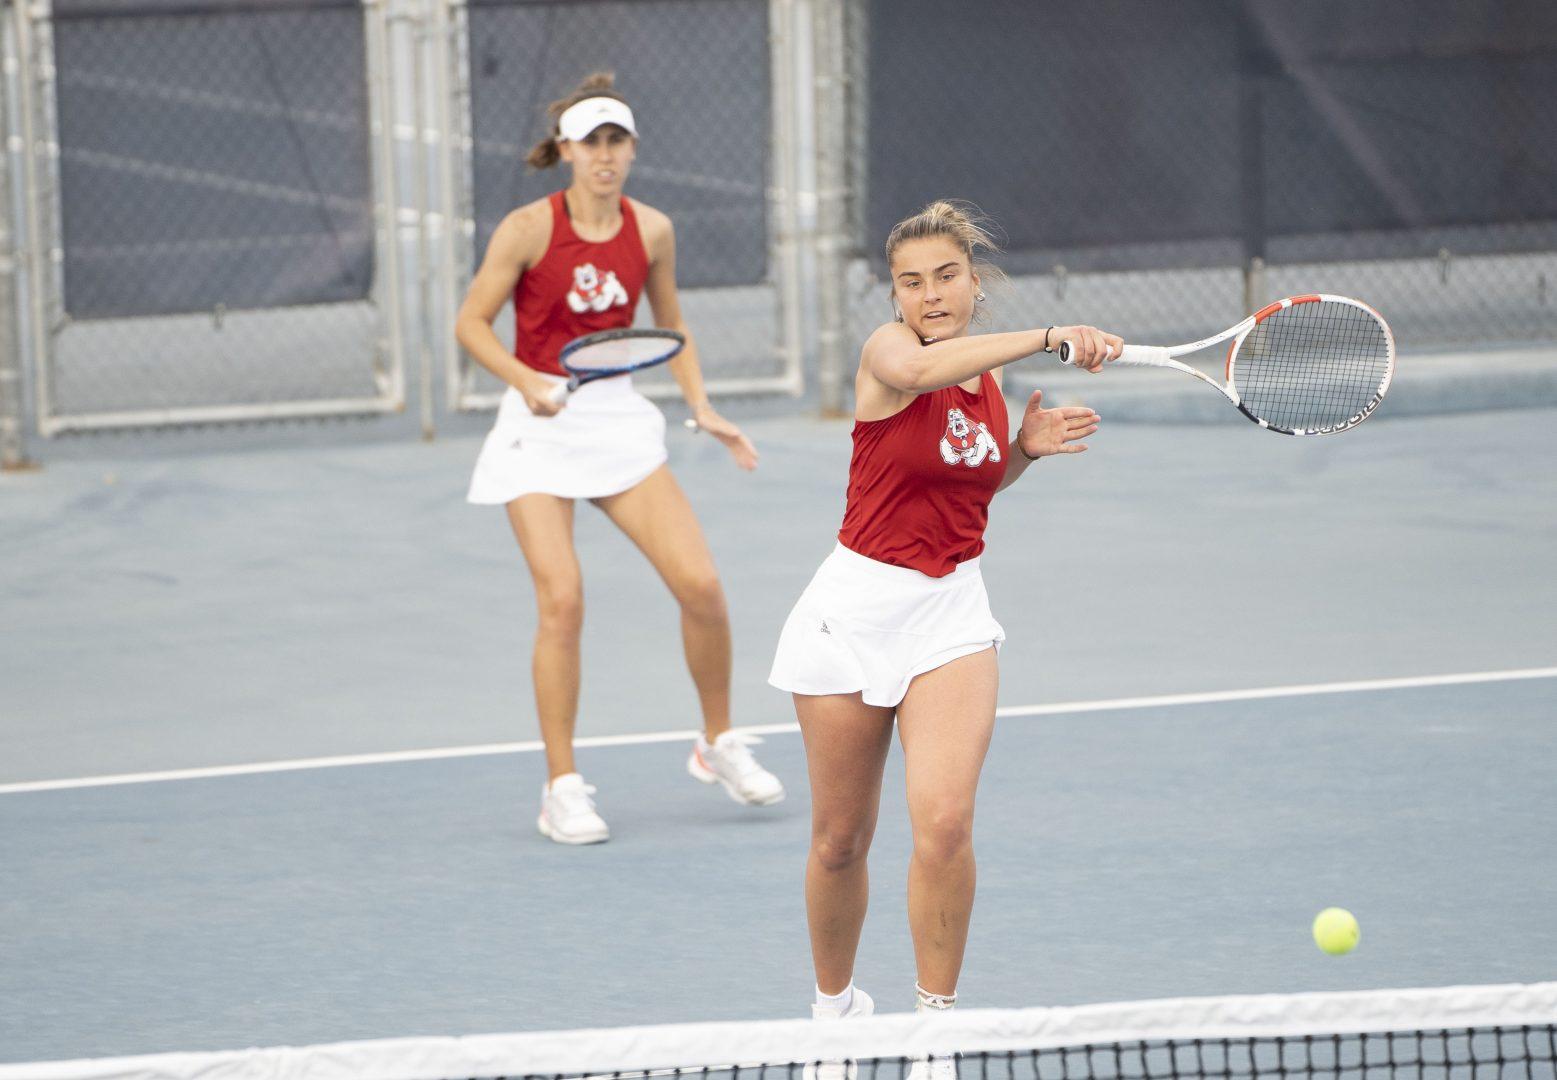 Junior Carlotta Nonnis Marzano (right) and Sophomore Carolina Piferi (left) compete in doubles against Saint Marys College on Wednesday, Feb. 2, 2022, at the Spalding G. Wathen Tennis Center. (Wyatt Bible/ The Collegian)